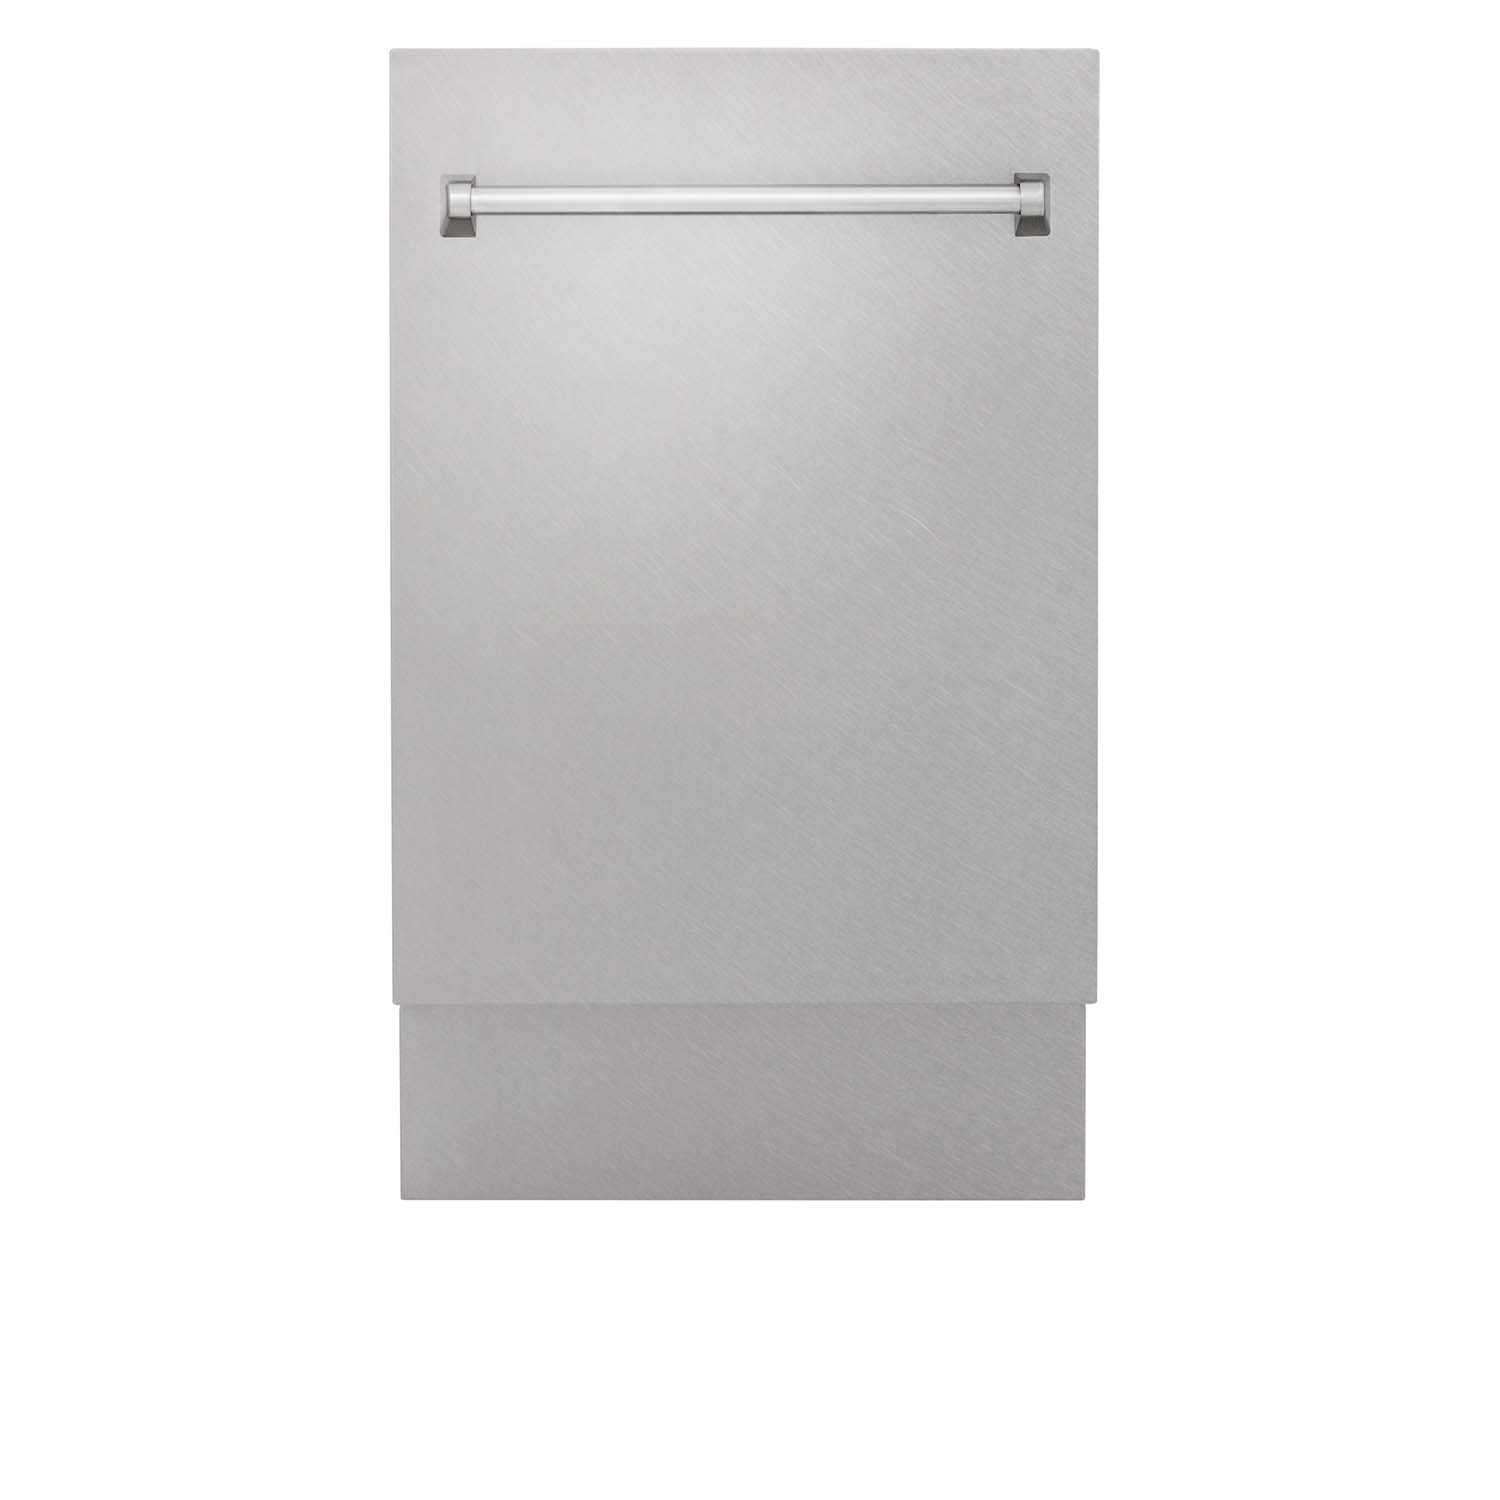 ZLINE 18" Tallac Series 3rd Rack Top Control Dishwasher in Fingerprint Resistant with Stainless Steel Tub, 51dBa (DWV-SN-18)